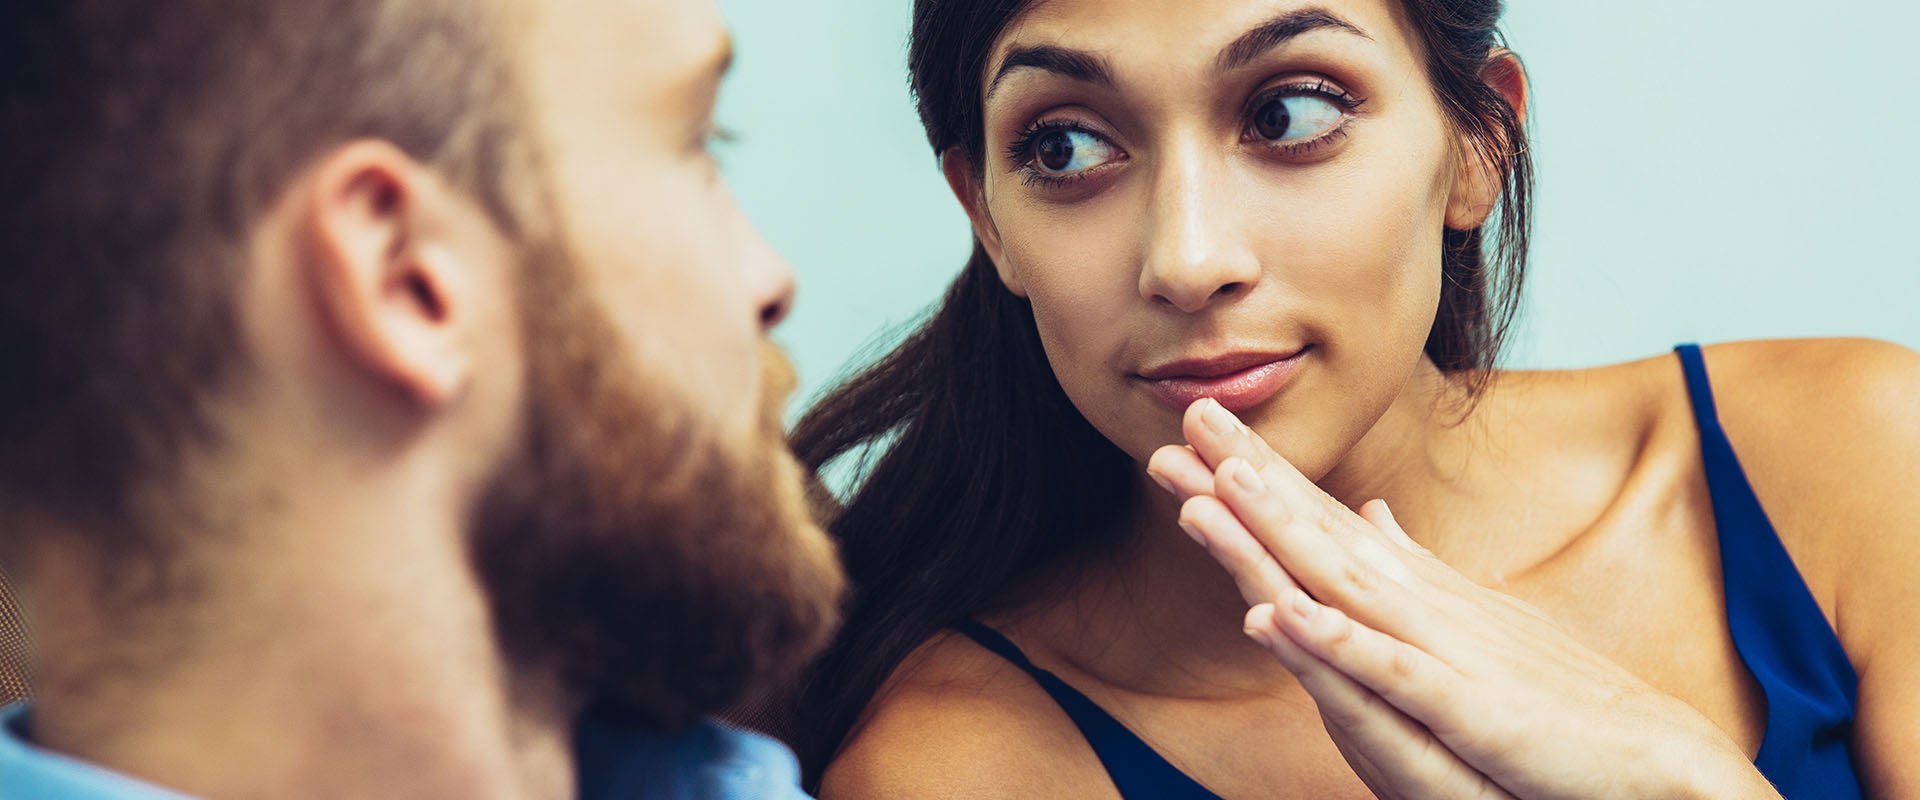 Woman looks man in the eye as an example of how to ask someone out